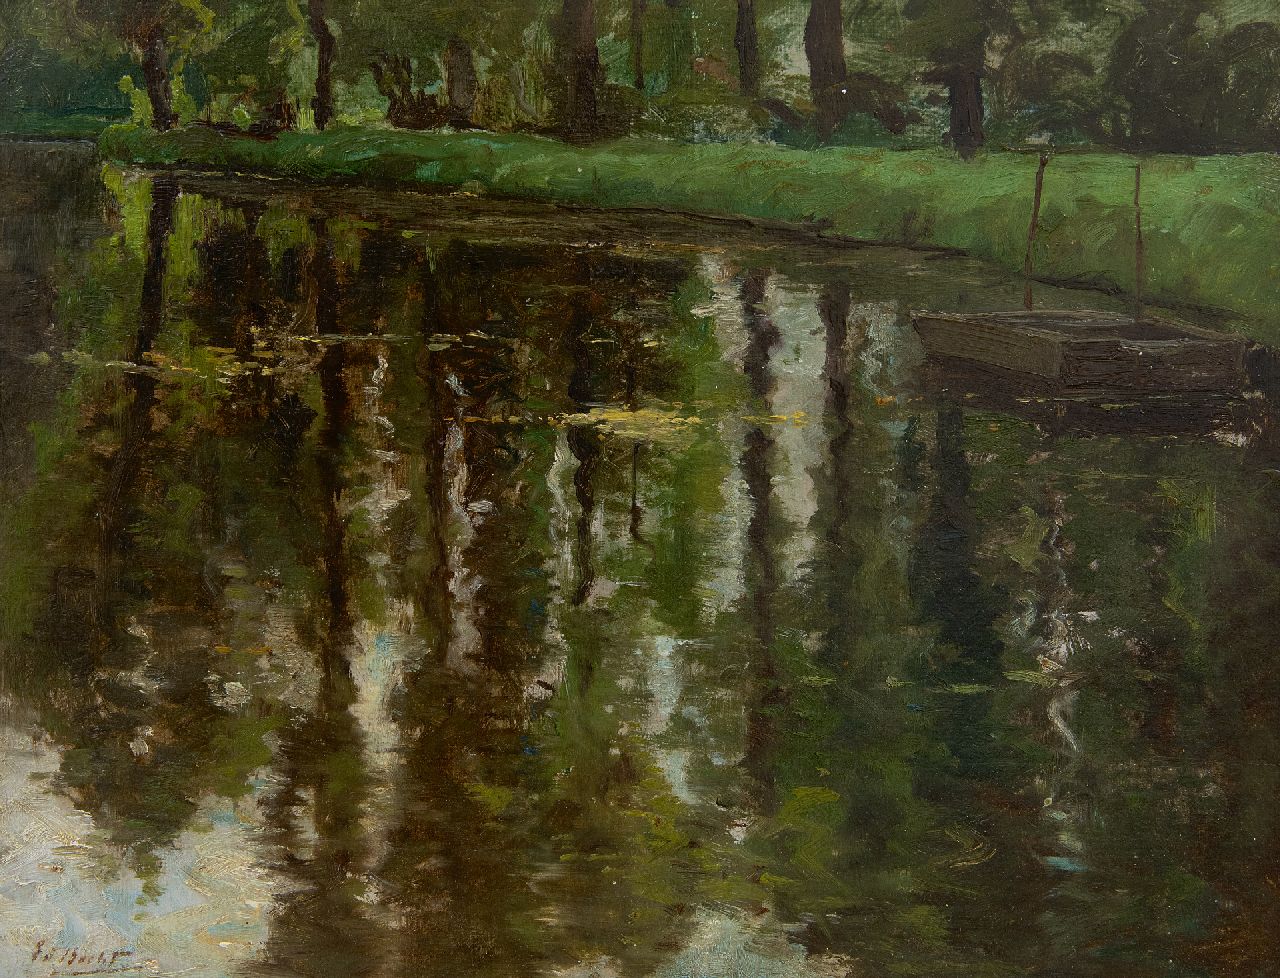 Becht E.A.  | Eduard August 'Ed' Becht | Paintings offered for sale | Pond in the Haagse Bos, The Hague, oil on board laid down on panel 27.0 x 35.1 cm, signed l.l. and without frame